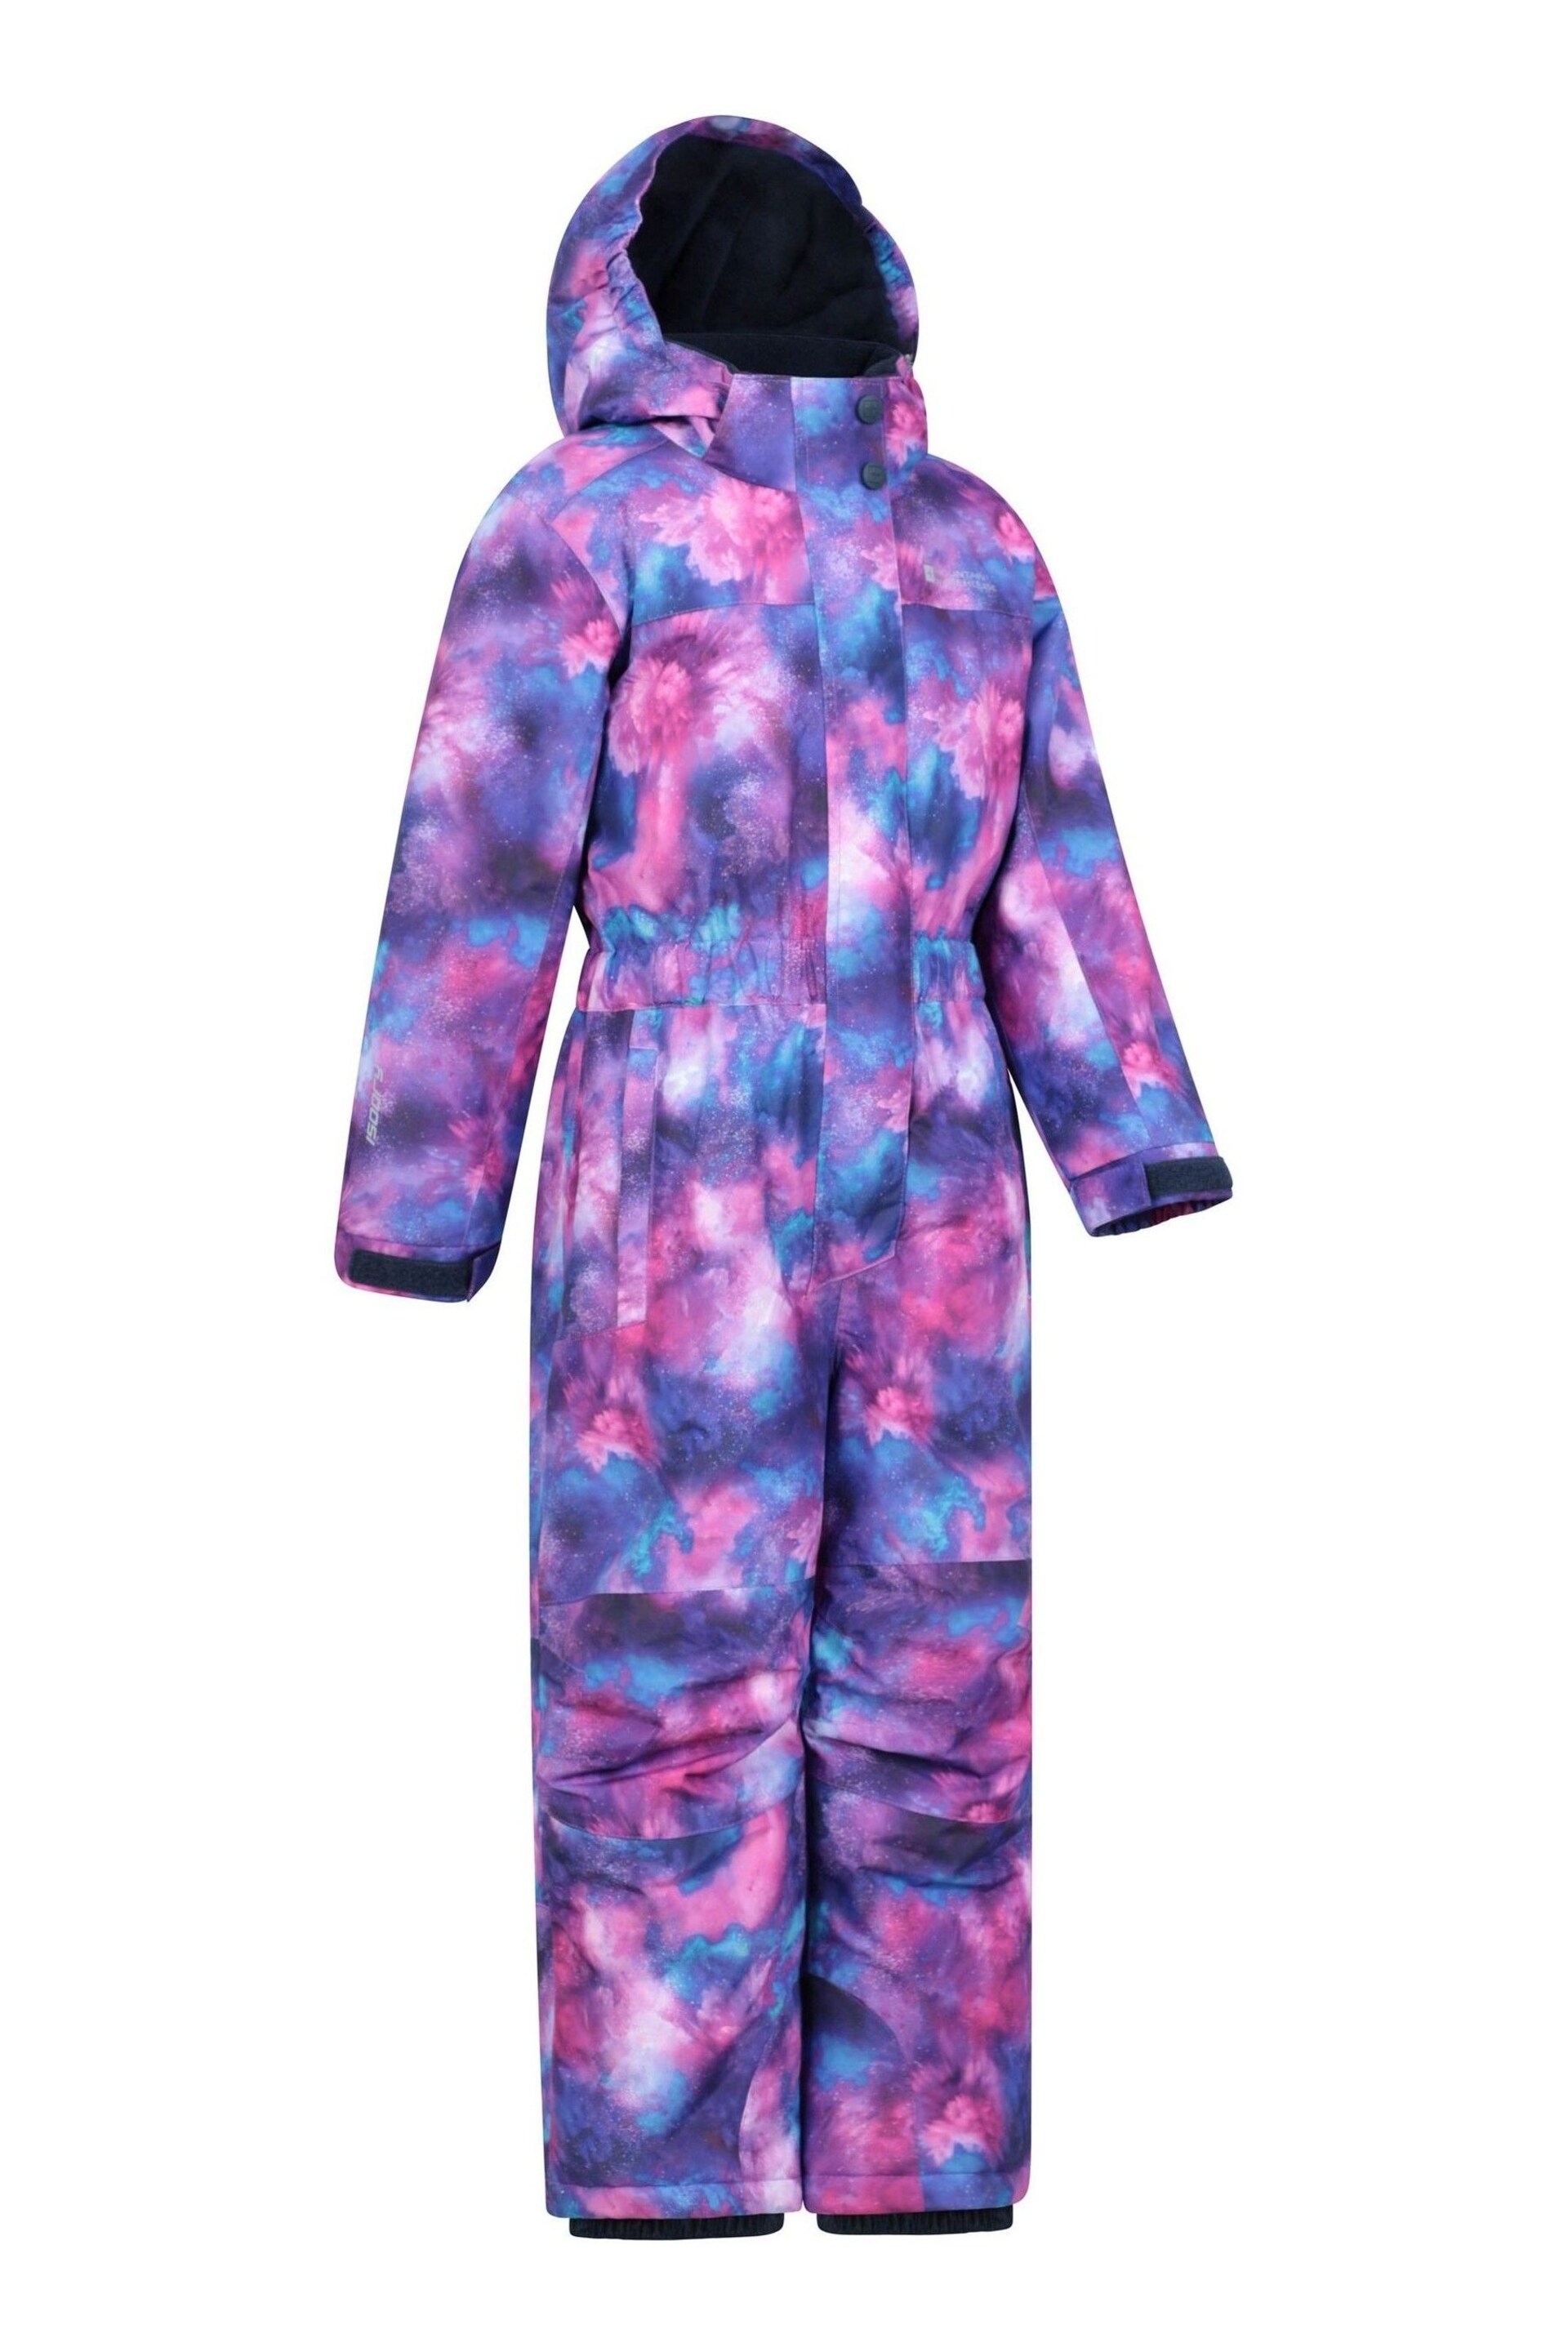 Mountain Warehouse Pink Kids Cloud Printed All in One Snowsuit - Image 2 of 5